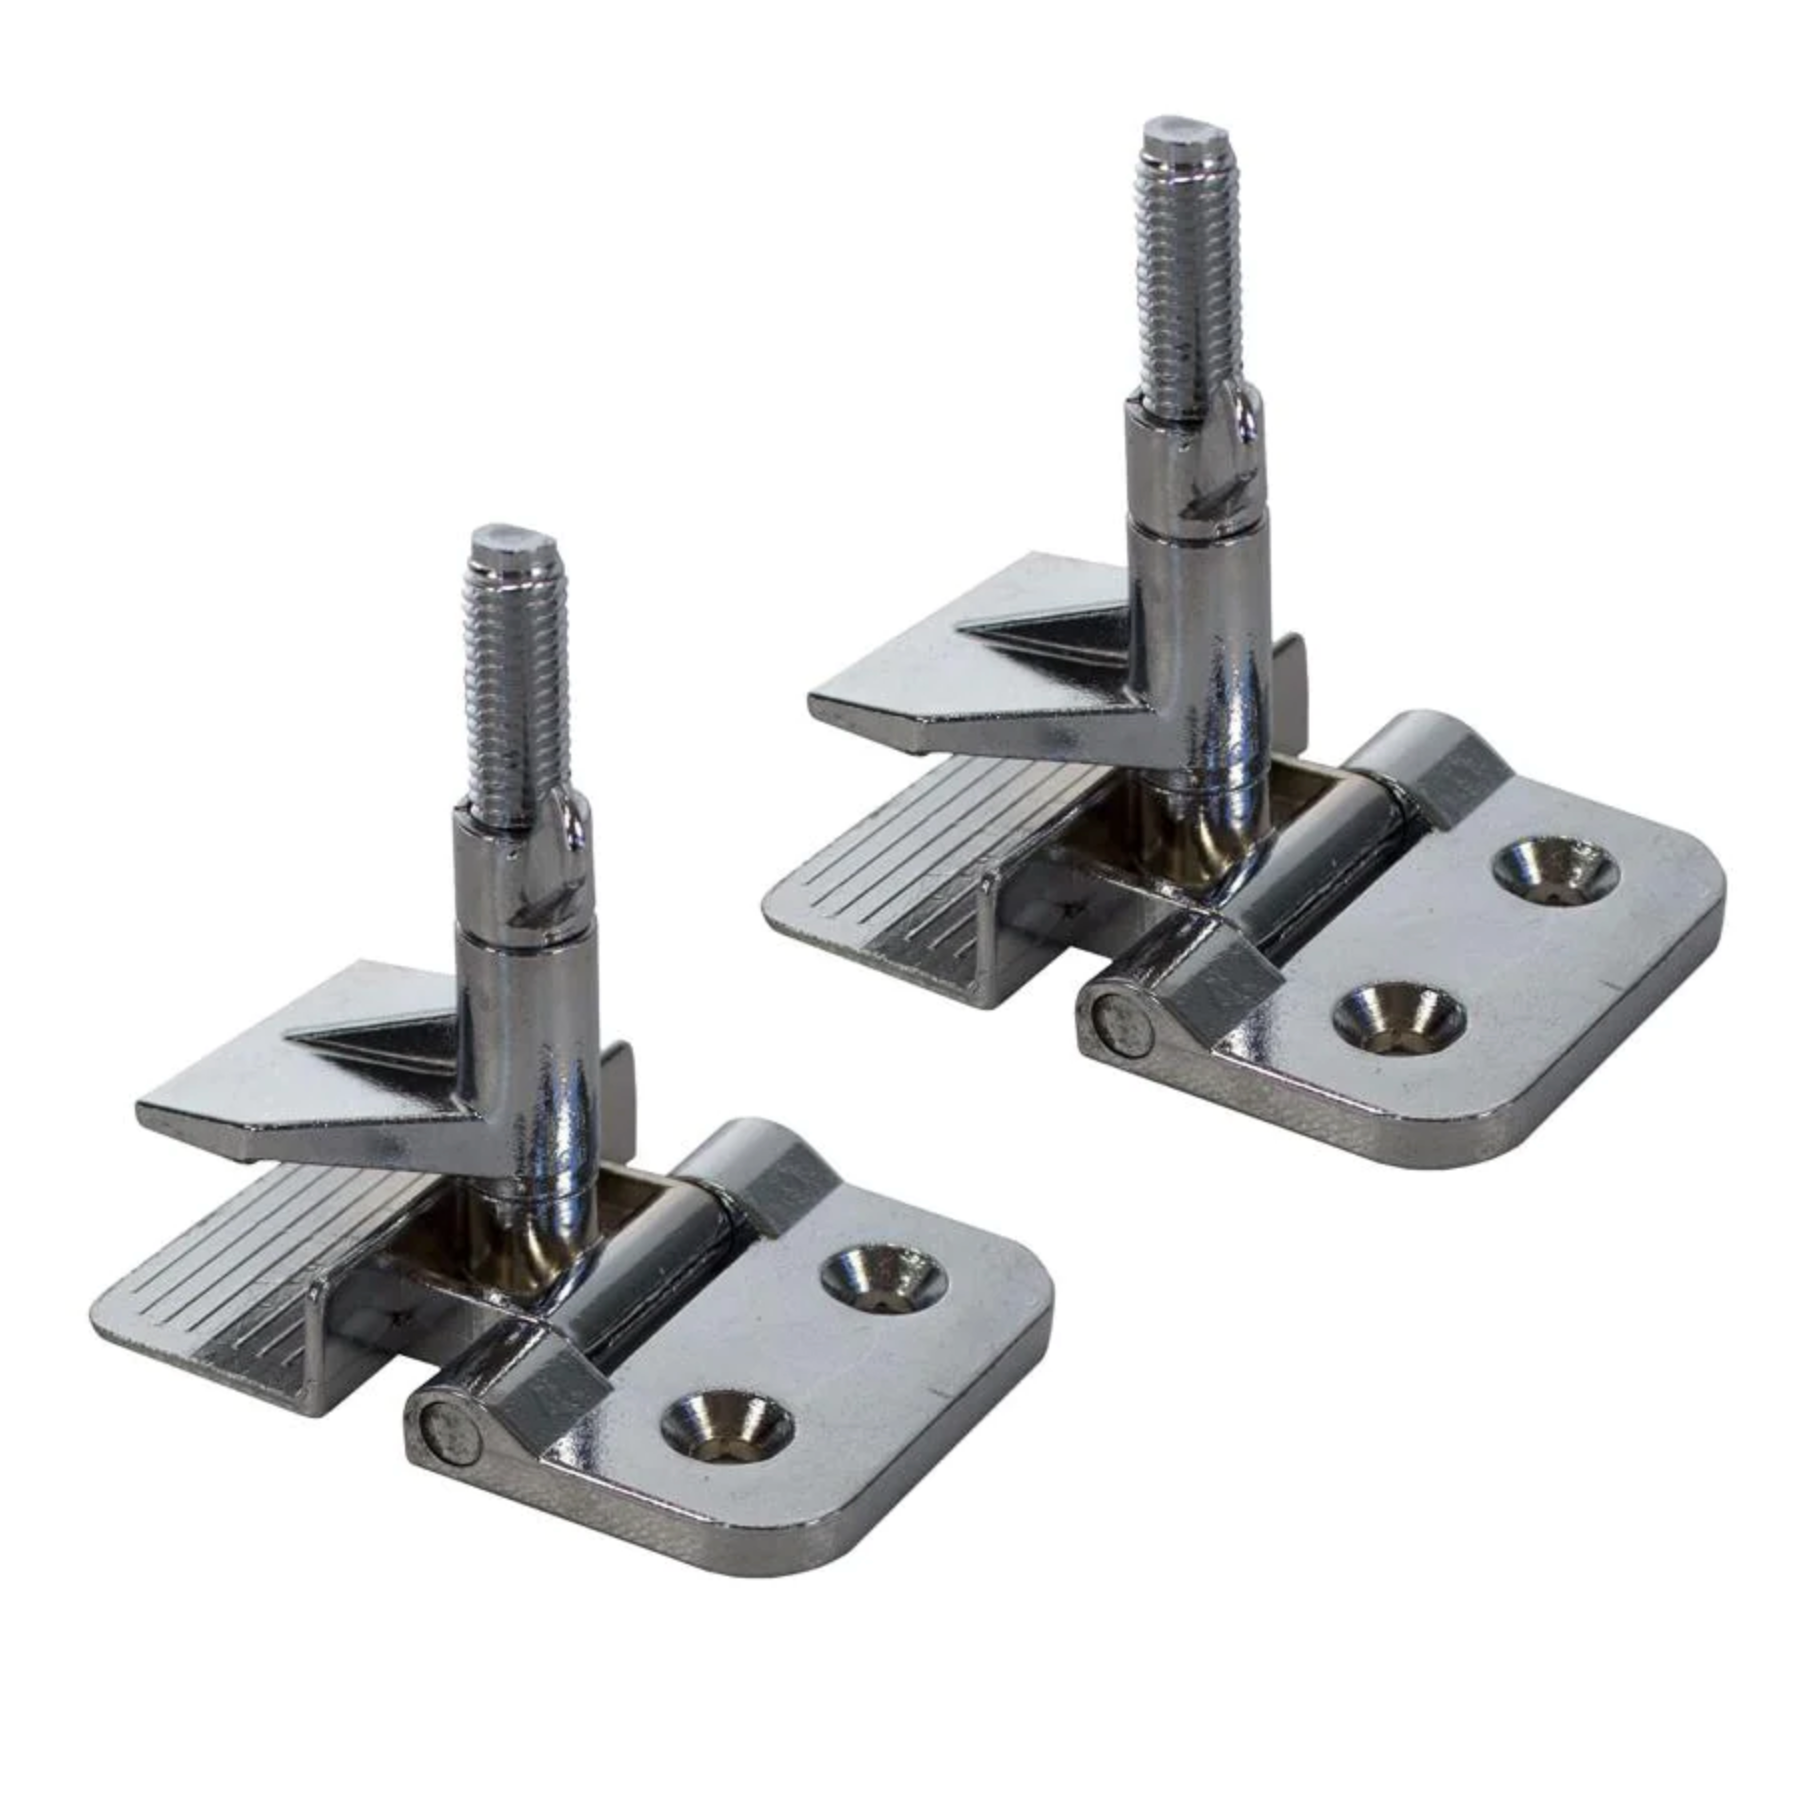 Economy Jiffy Clamps - Melbourne Etching Supplies